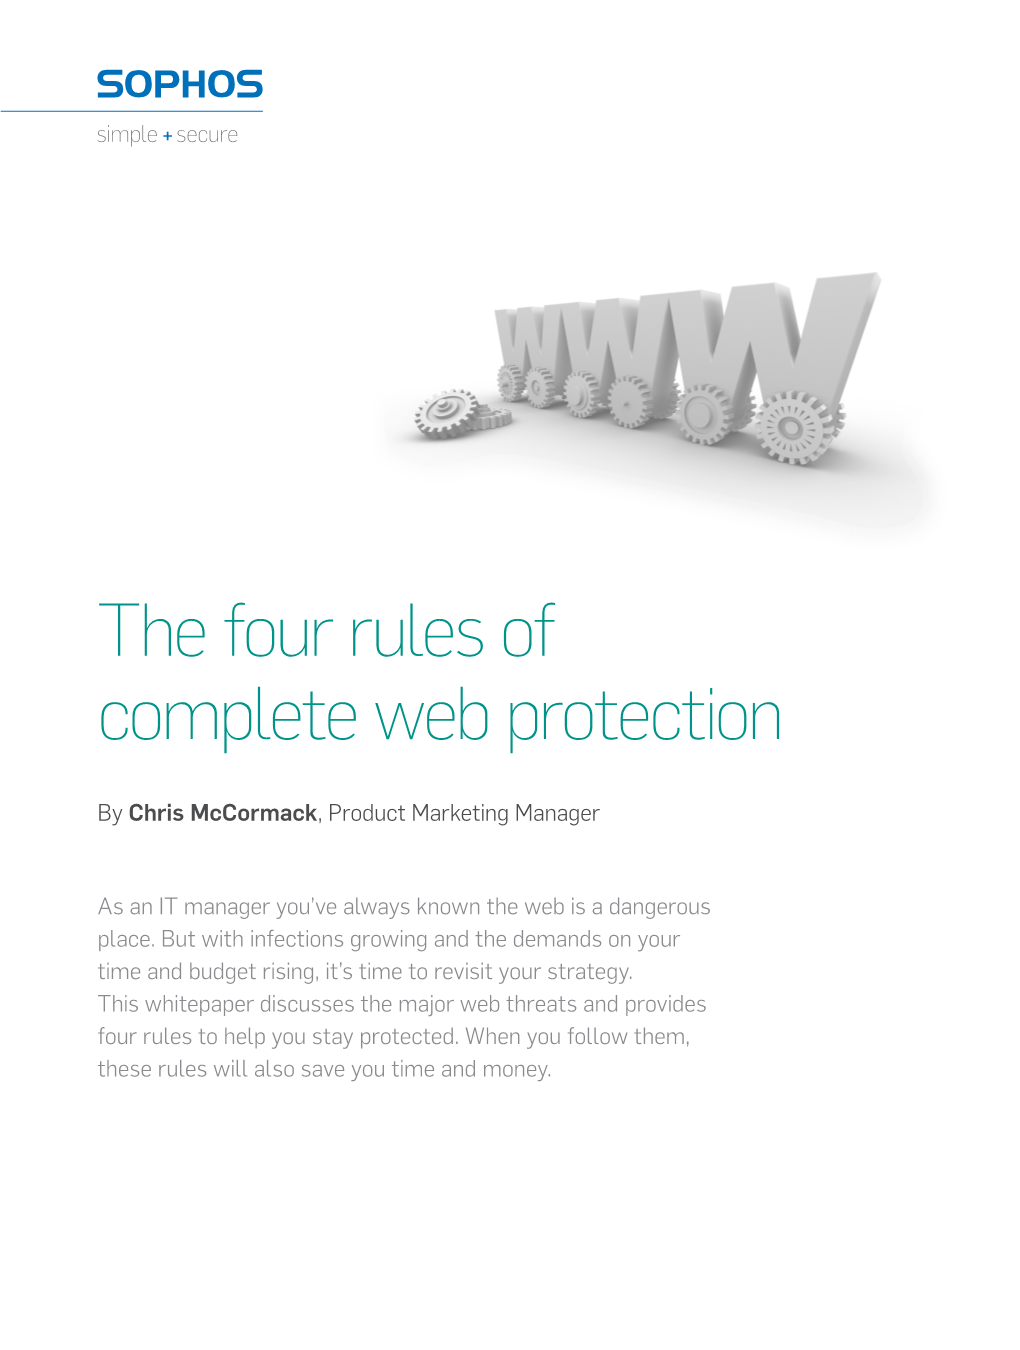 The Four Rules of Complete Web Protection